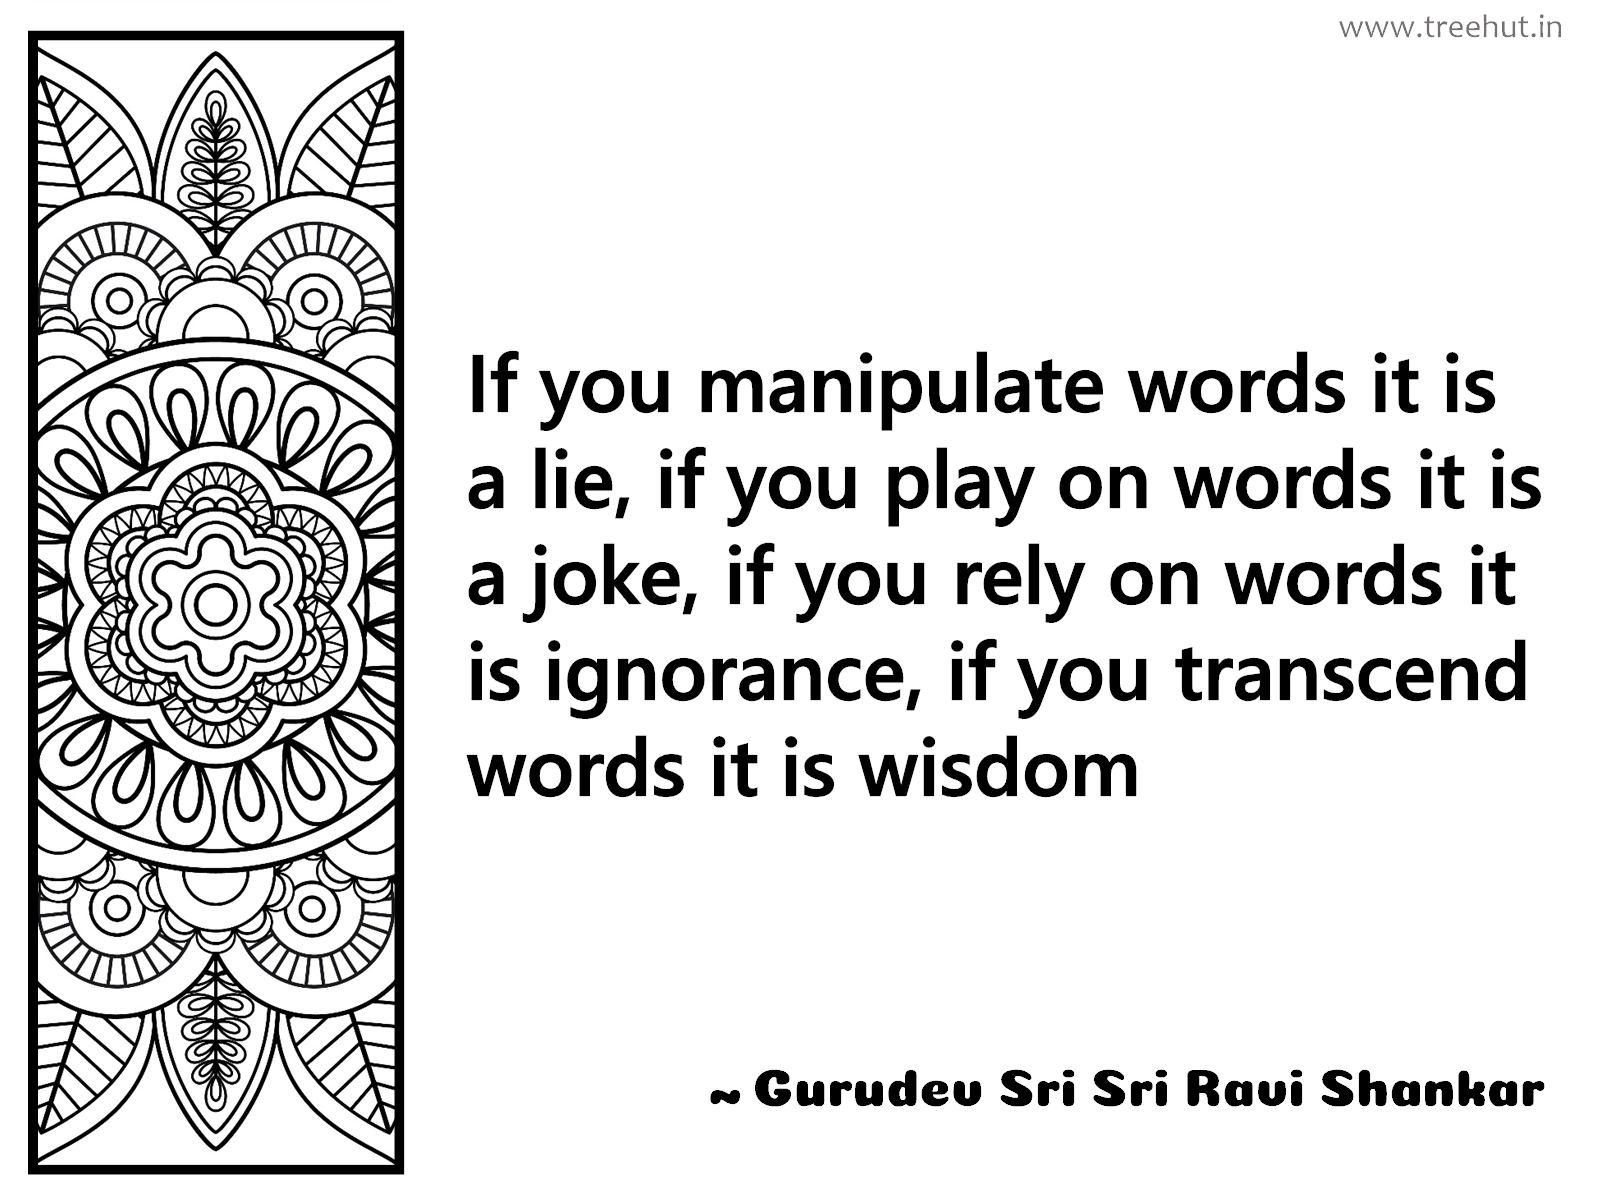 If you manipulate words it is a lie, if you play on words it is a joke, if you rely on words it is ignorance, if you transcend words it is wisdom Inspirational Quote by Gurudev Sri Sri Ravi Shankar, coloring pages